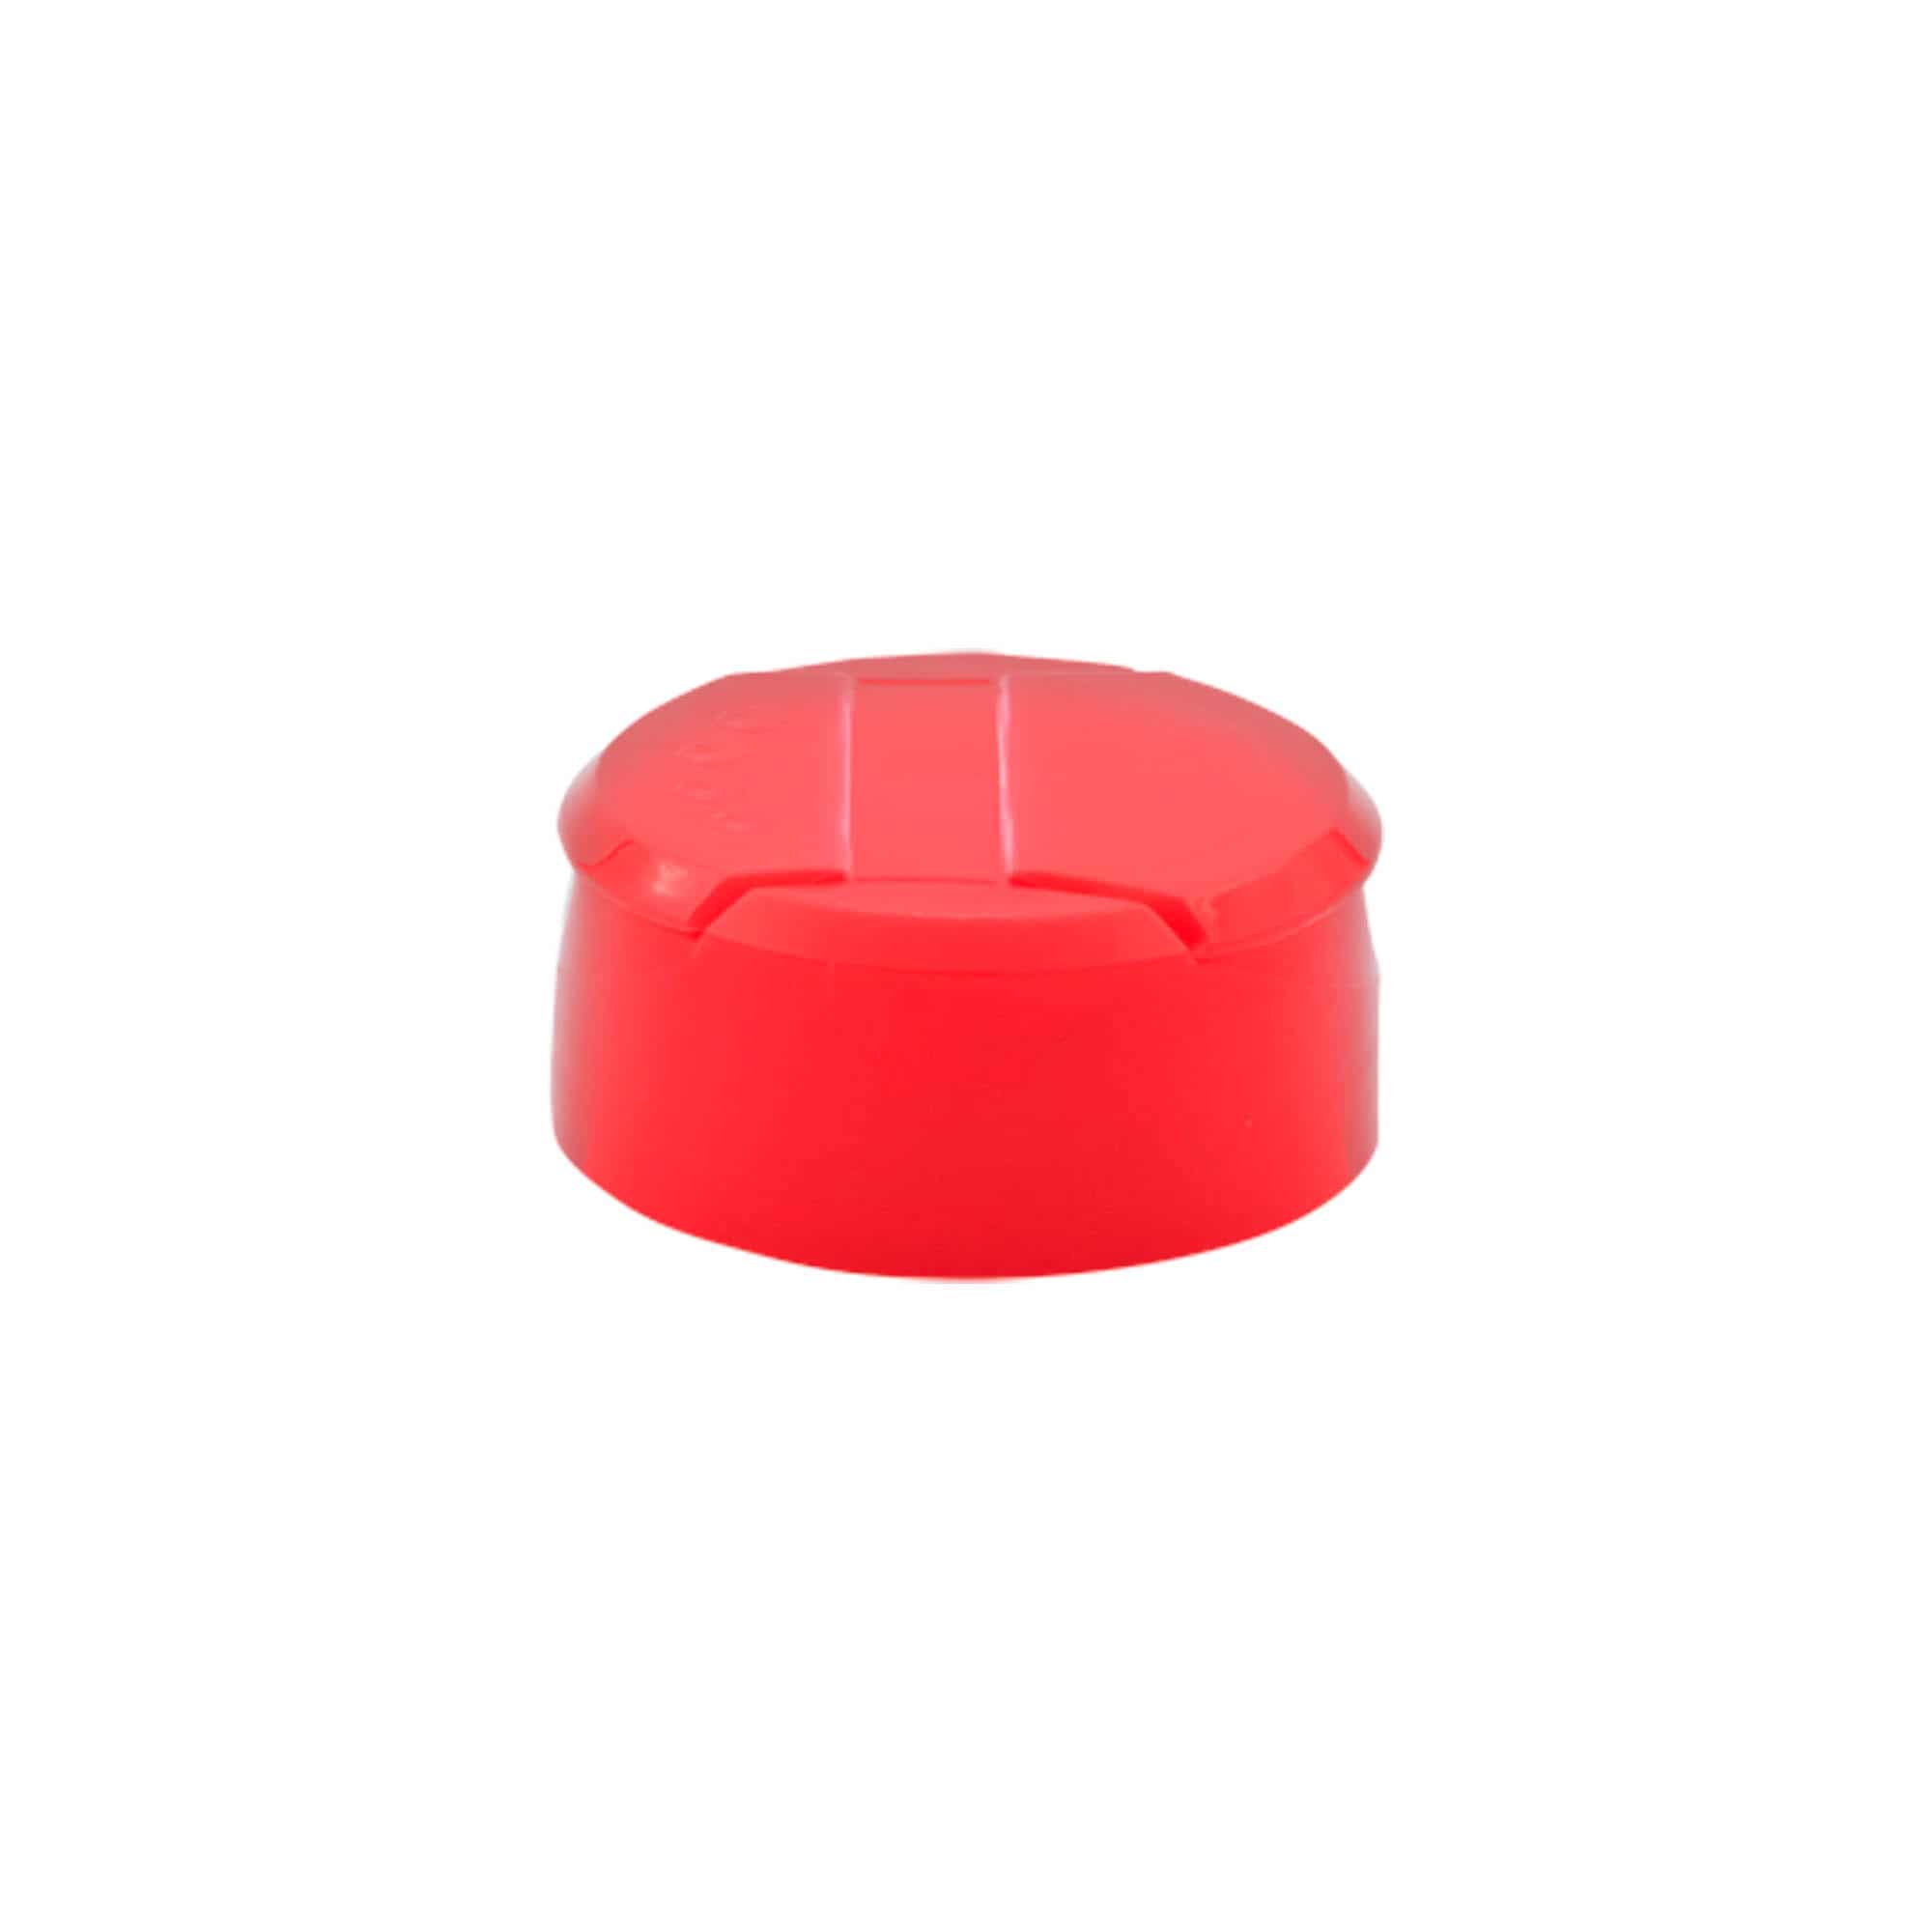 Shaker cap for spice jar, PP plastic, red, for opening: GPI 38/400